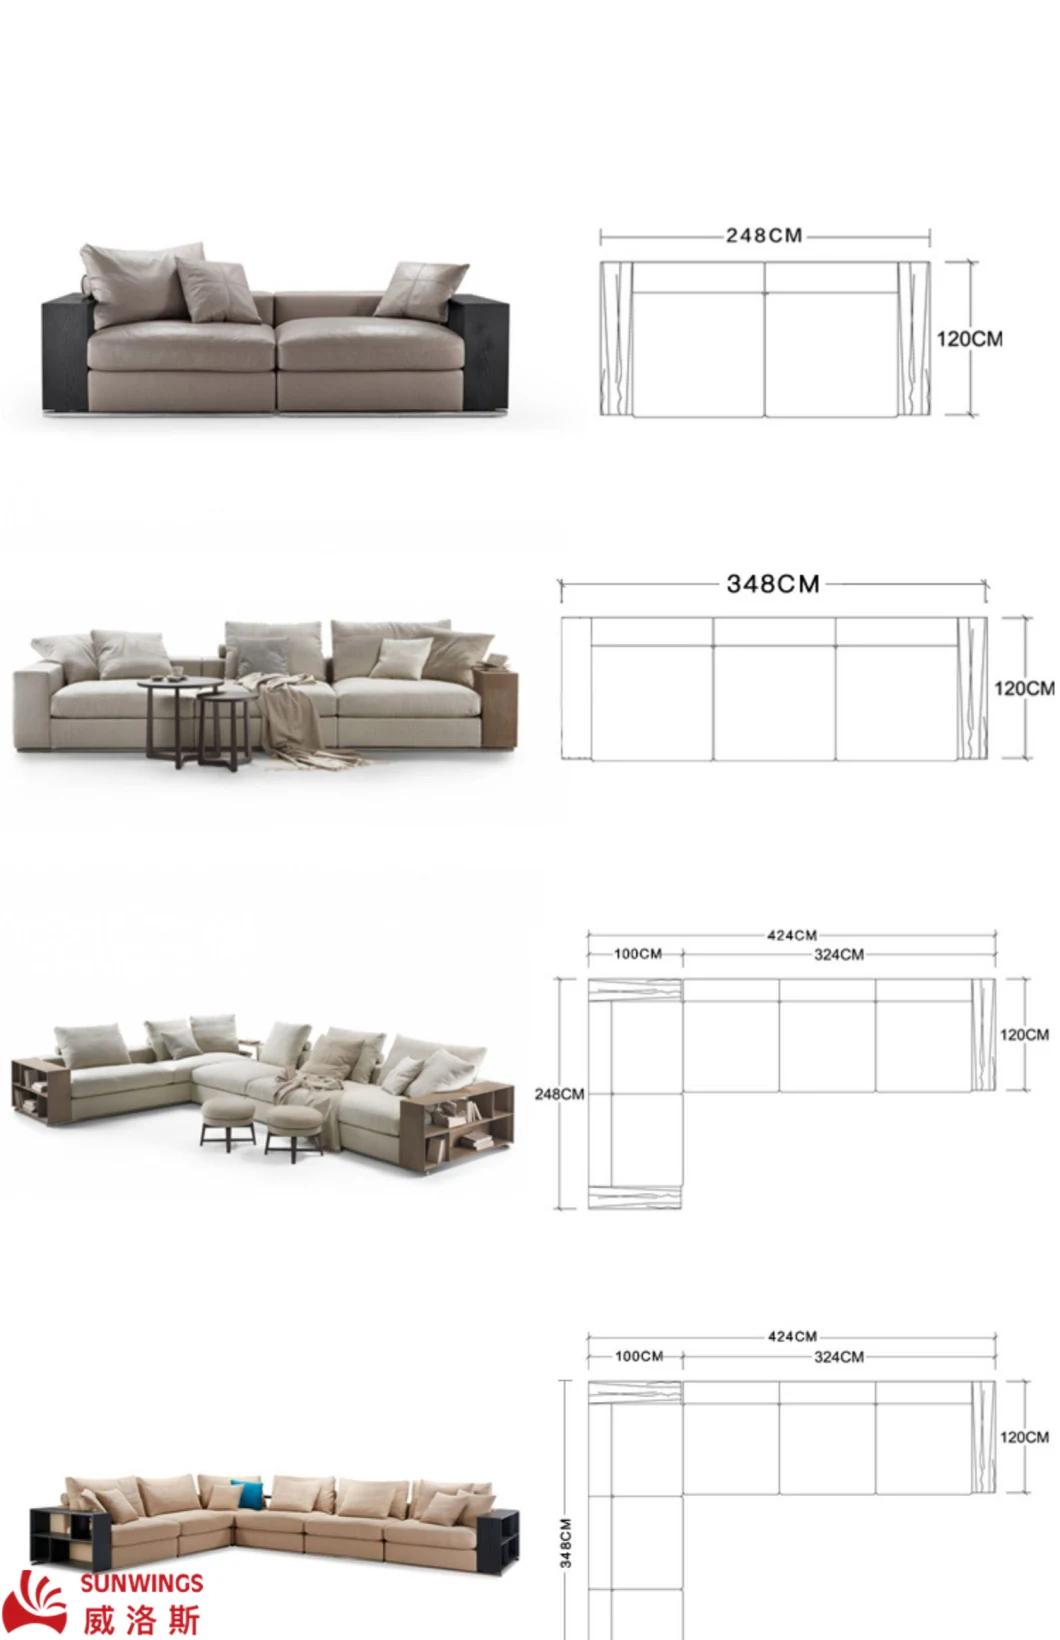 Light and Luxury Metal Frame with Wood Armrest Recreational Fabric Sofa for Hotel